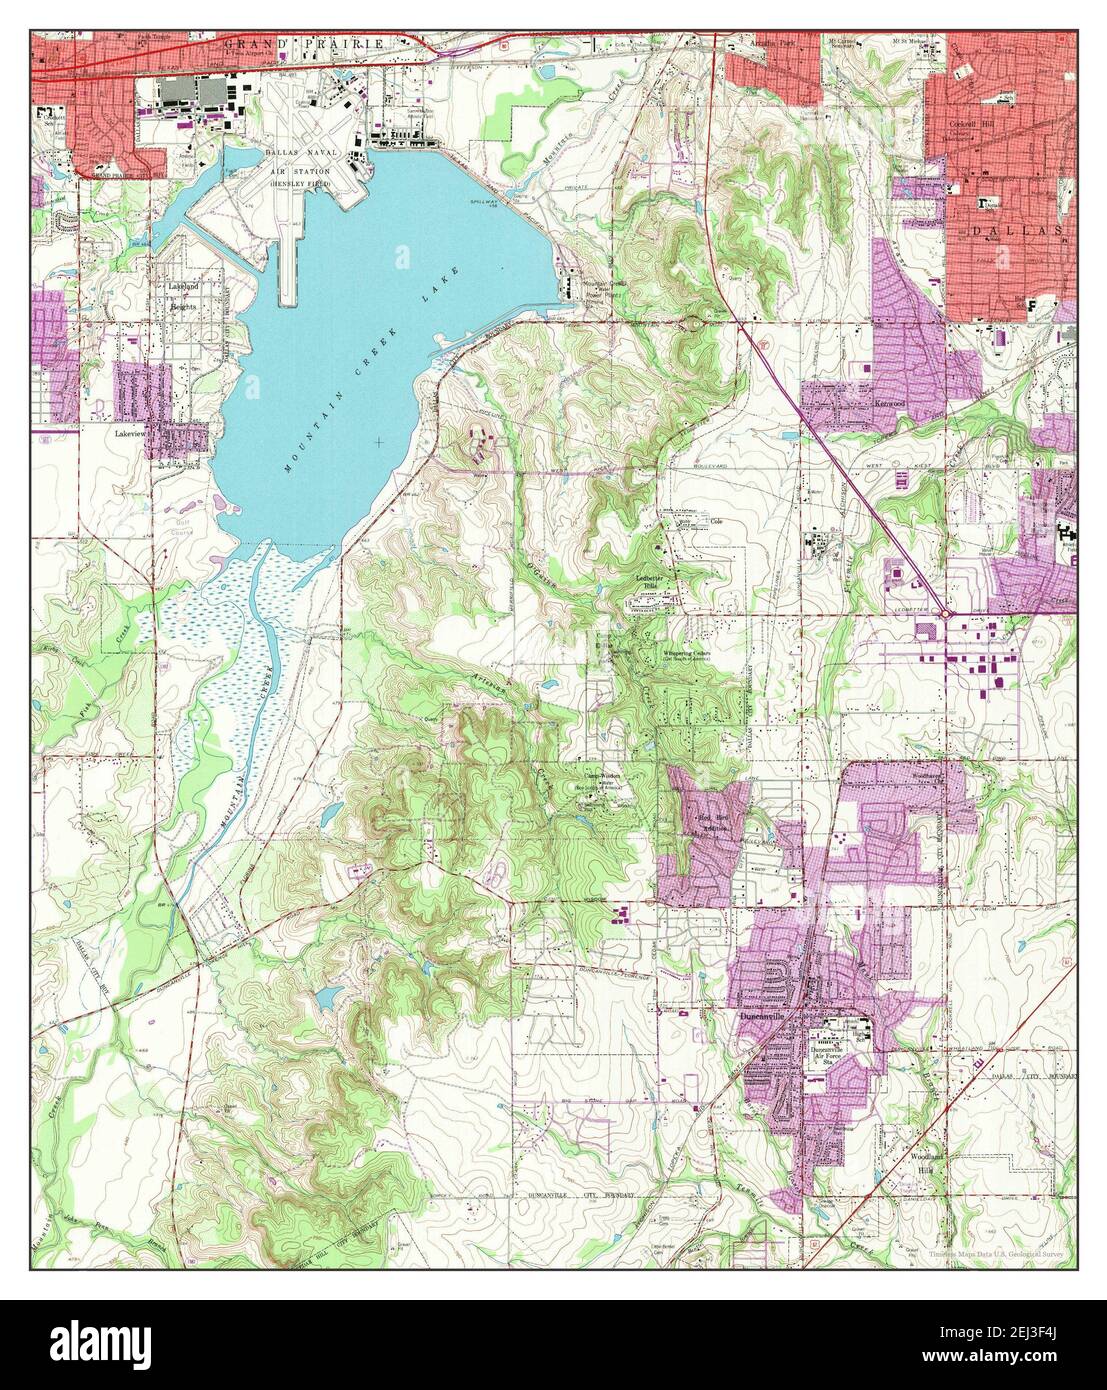 Duncanville, Texas, map 1959, 1:24000, United States of America by Timeless Maps, data U.S. Geological Survey Stock Photo